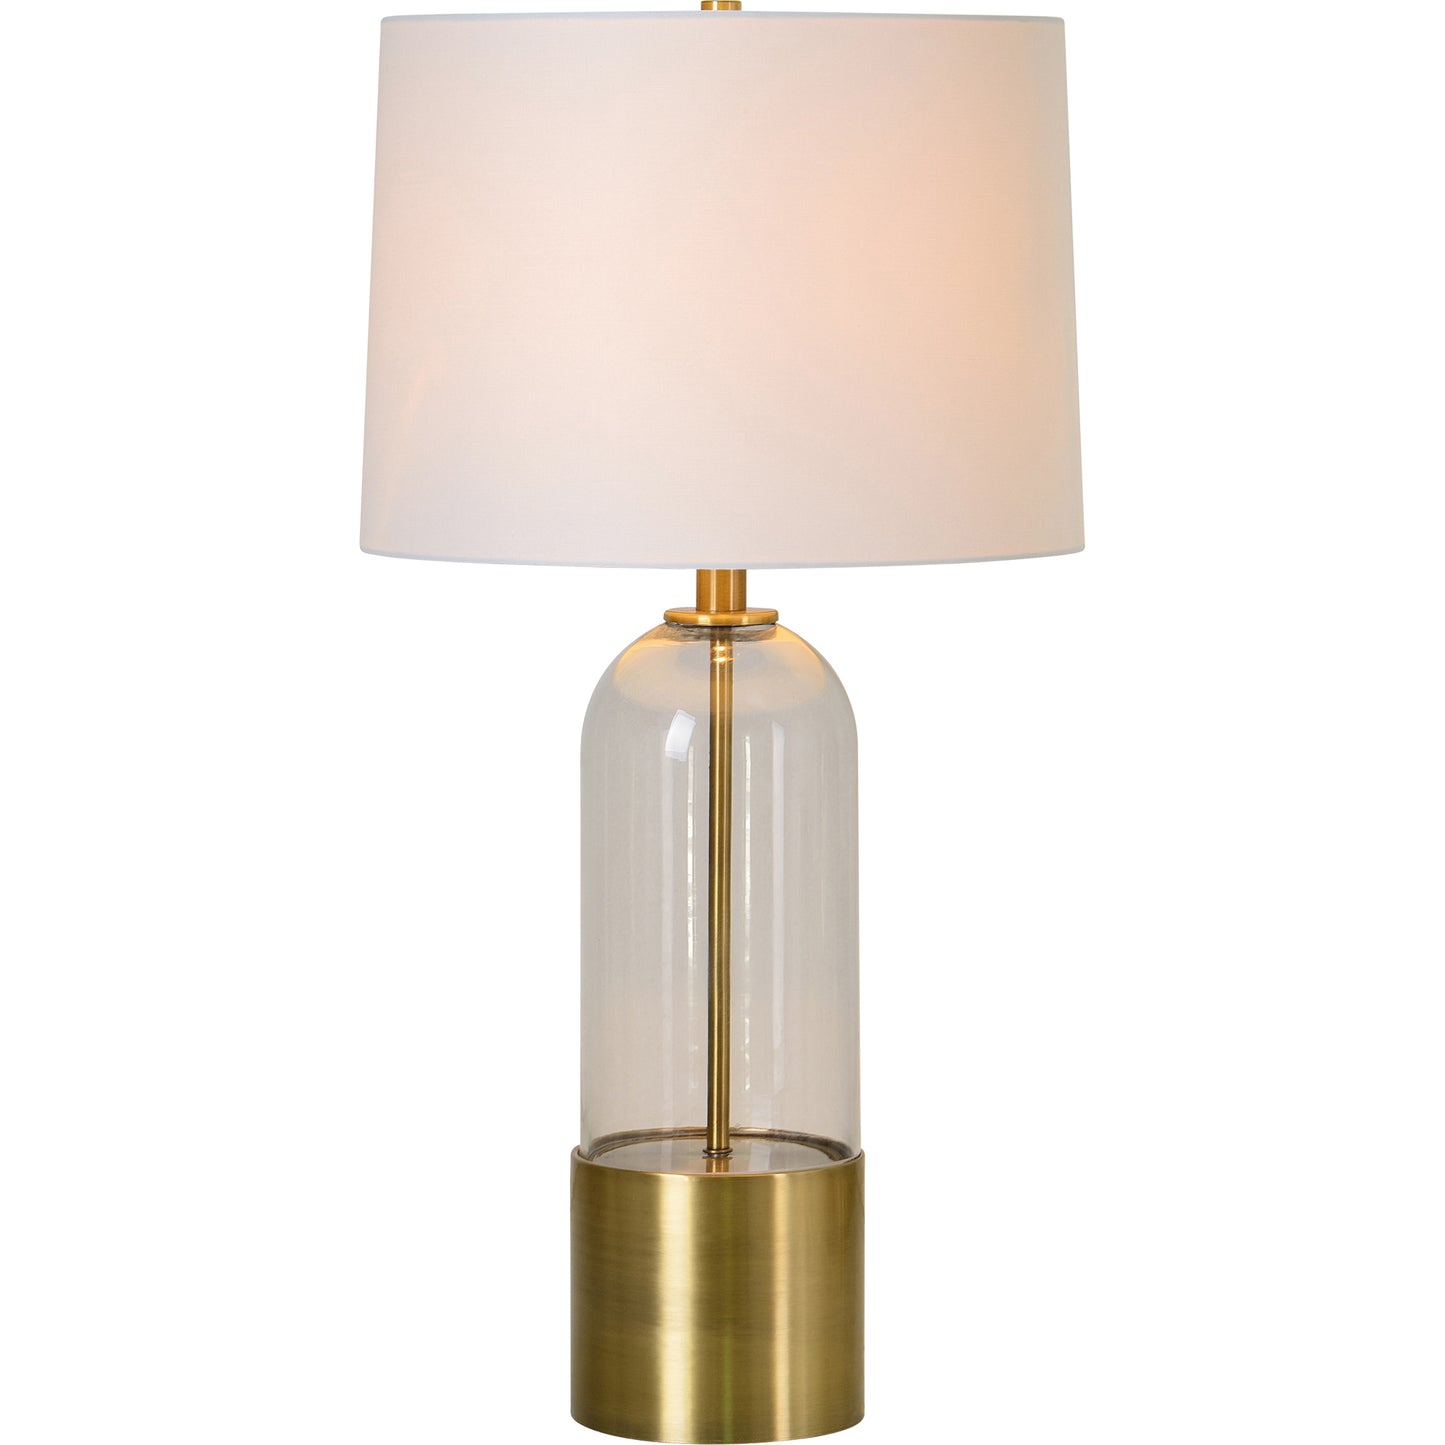 TABLE LAMP THELMA